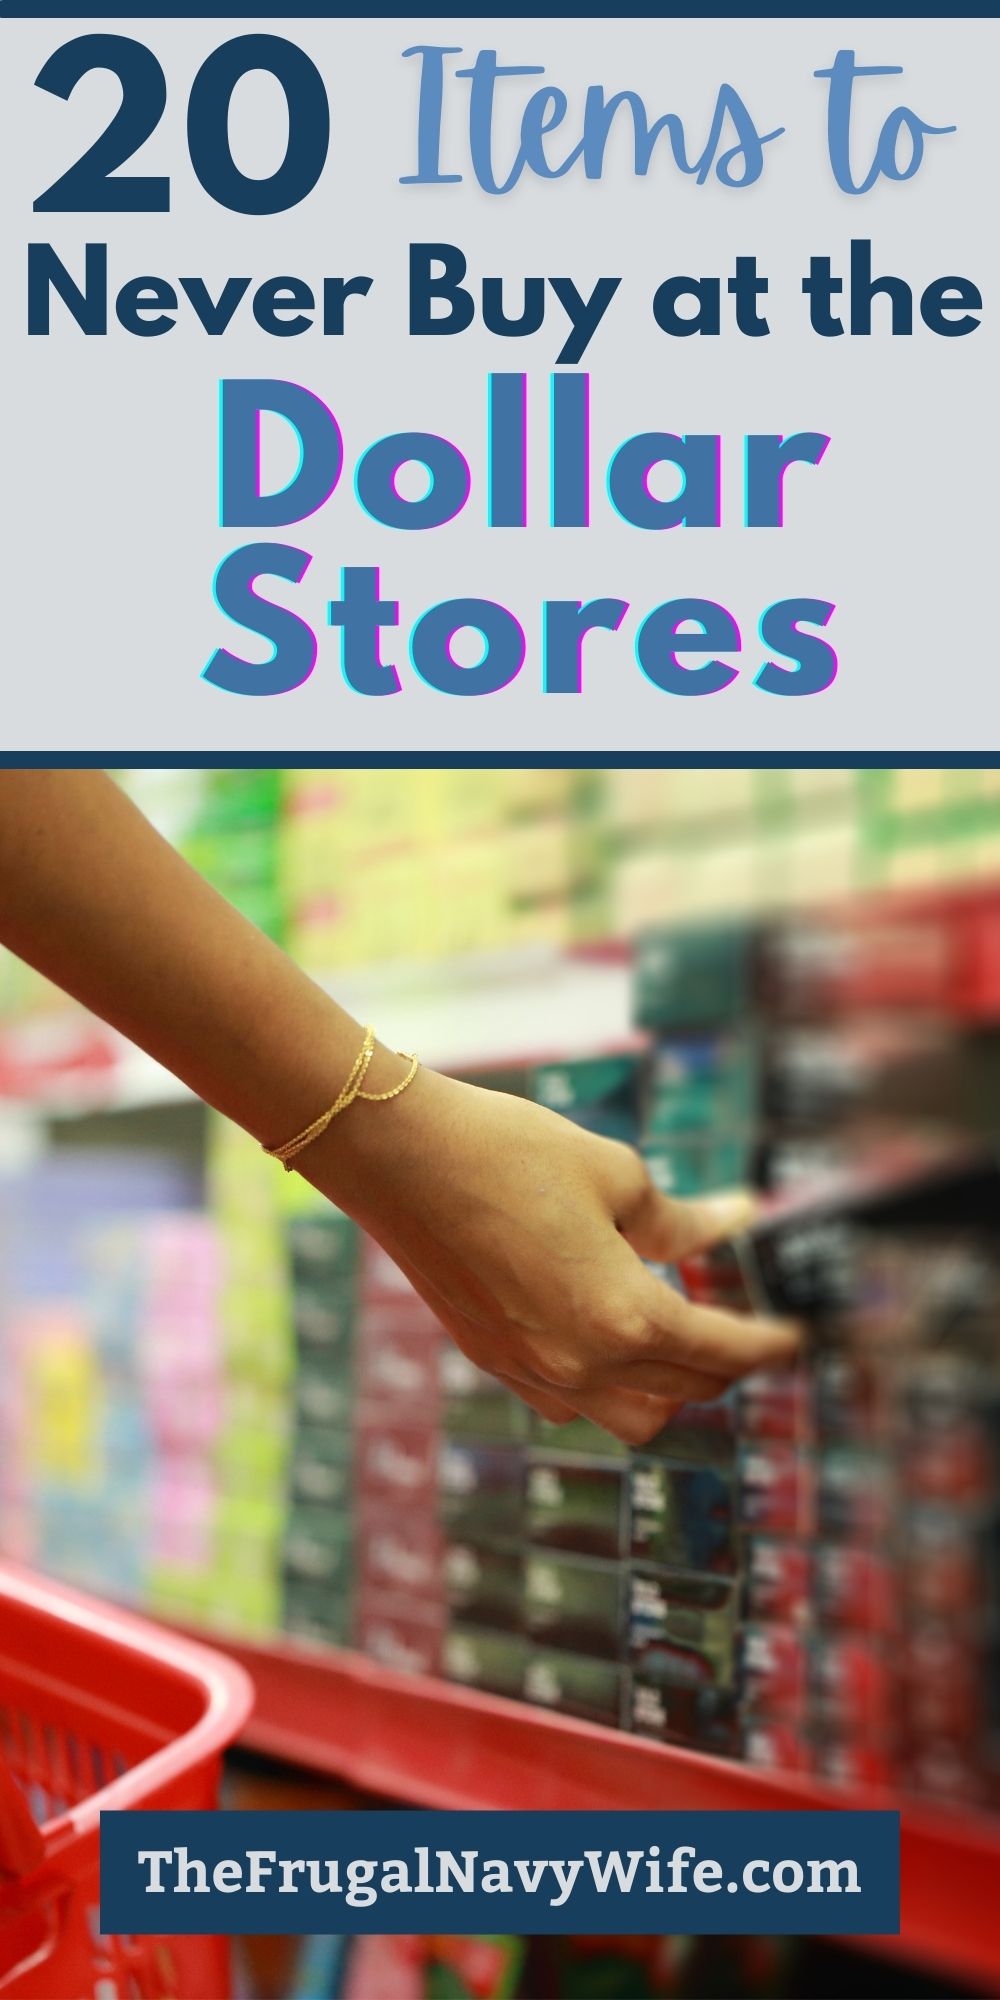 20 Items to Never Buy at the Dollar Stores - The Frugal Navy Wife